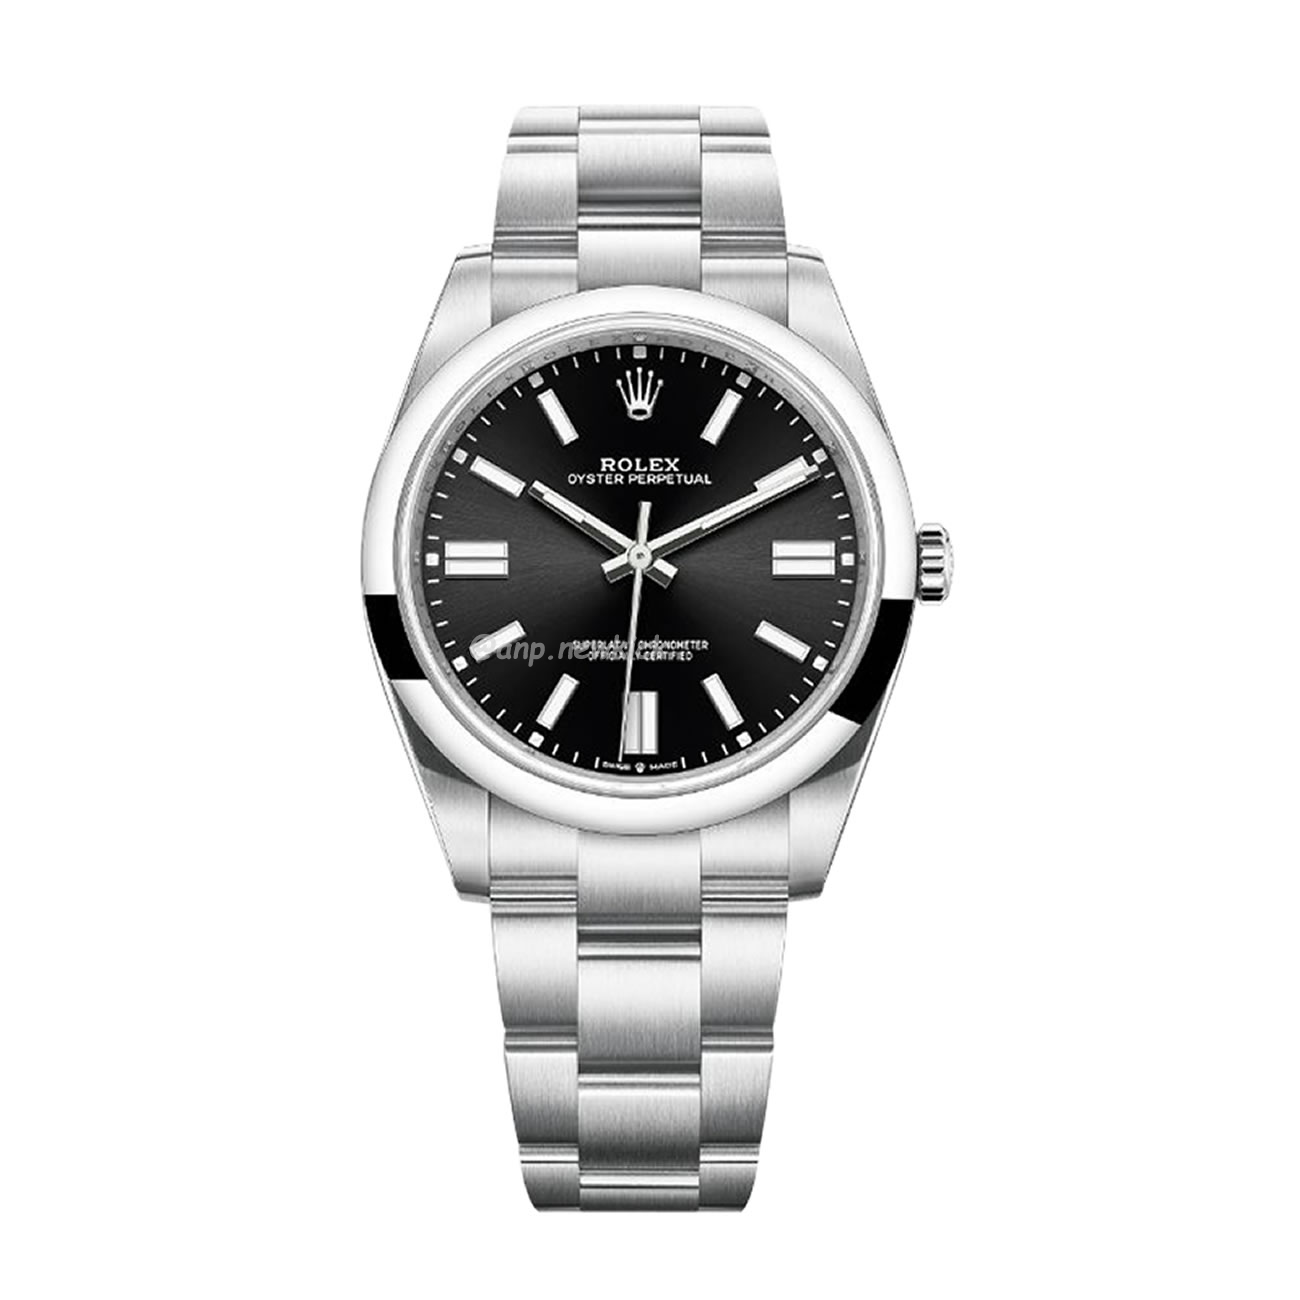 Rolex Oyster-Perpetual Green Bright Black